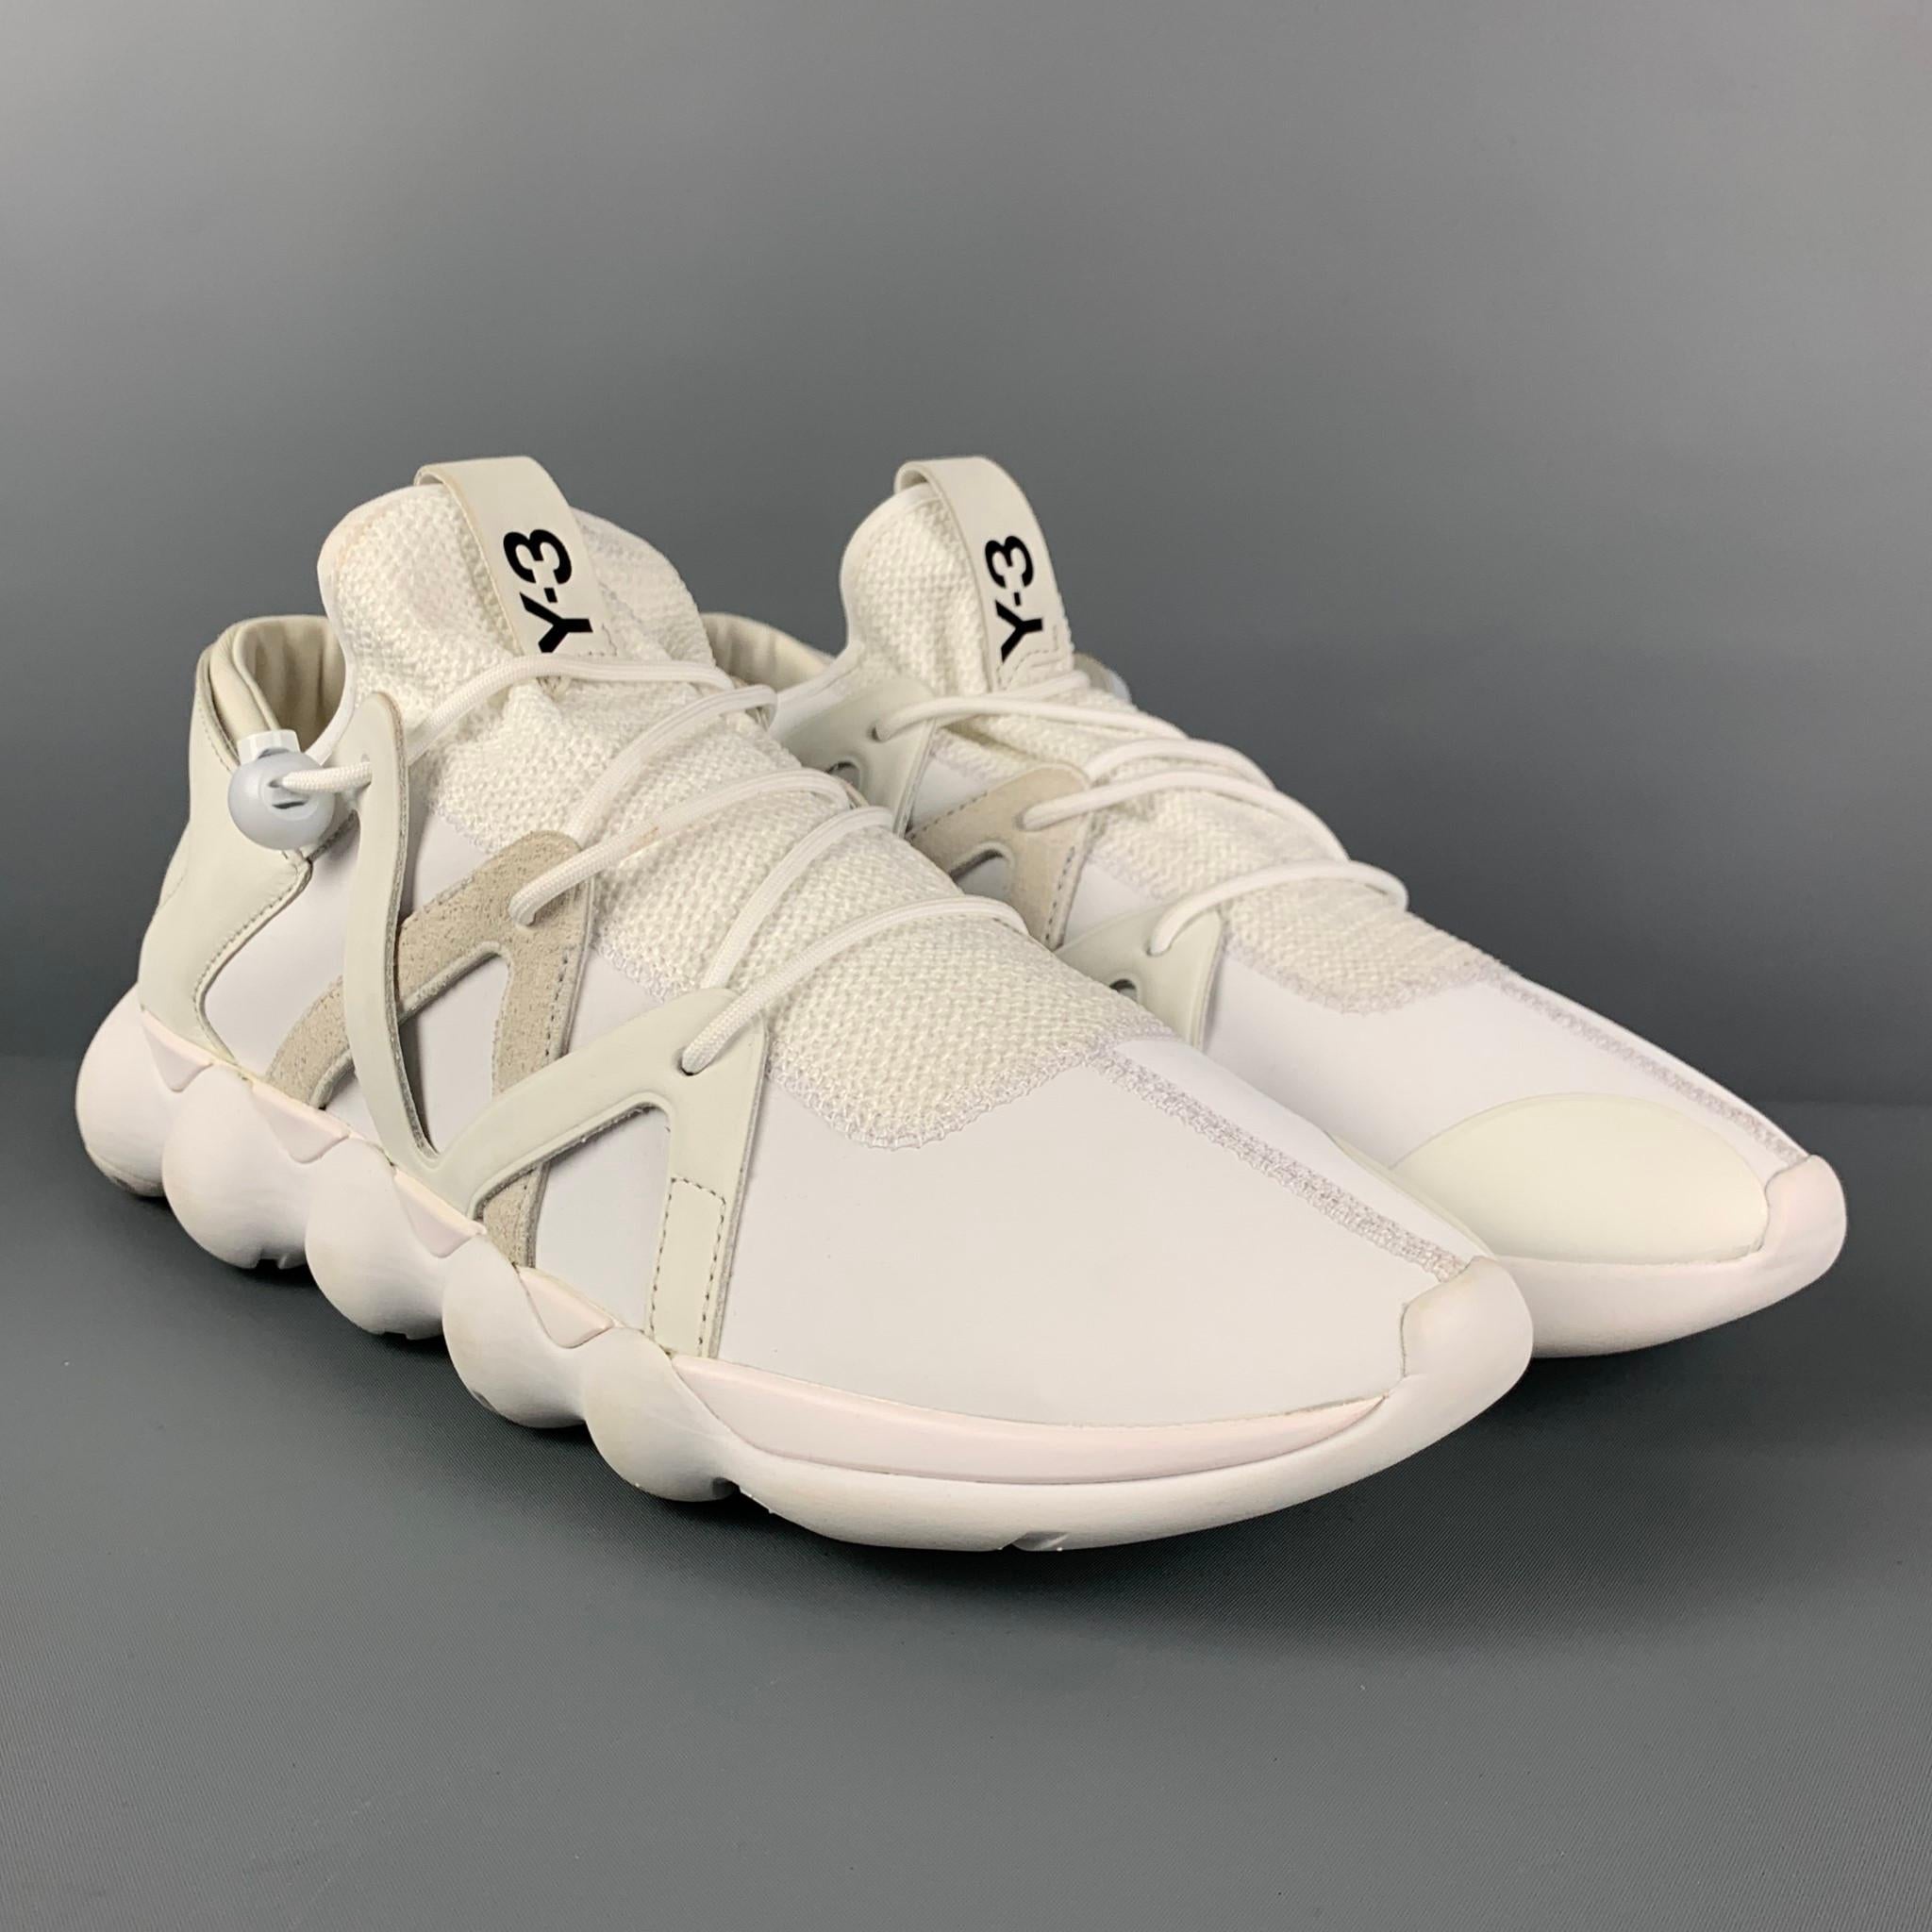 Y-3 by YOHJI YAMAMOTO 'Kyujo Low' sneakers comes in a white mixed fabrics with a suede trim featuring a rubber sole and a adjustable lace closure. 

Very Good Pre-Owned Condition. Minor wear.
Marked: 12.5
Original Retail Price: $295.00

Outsole: 13